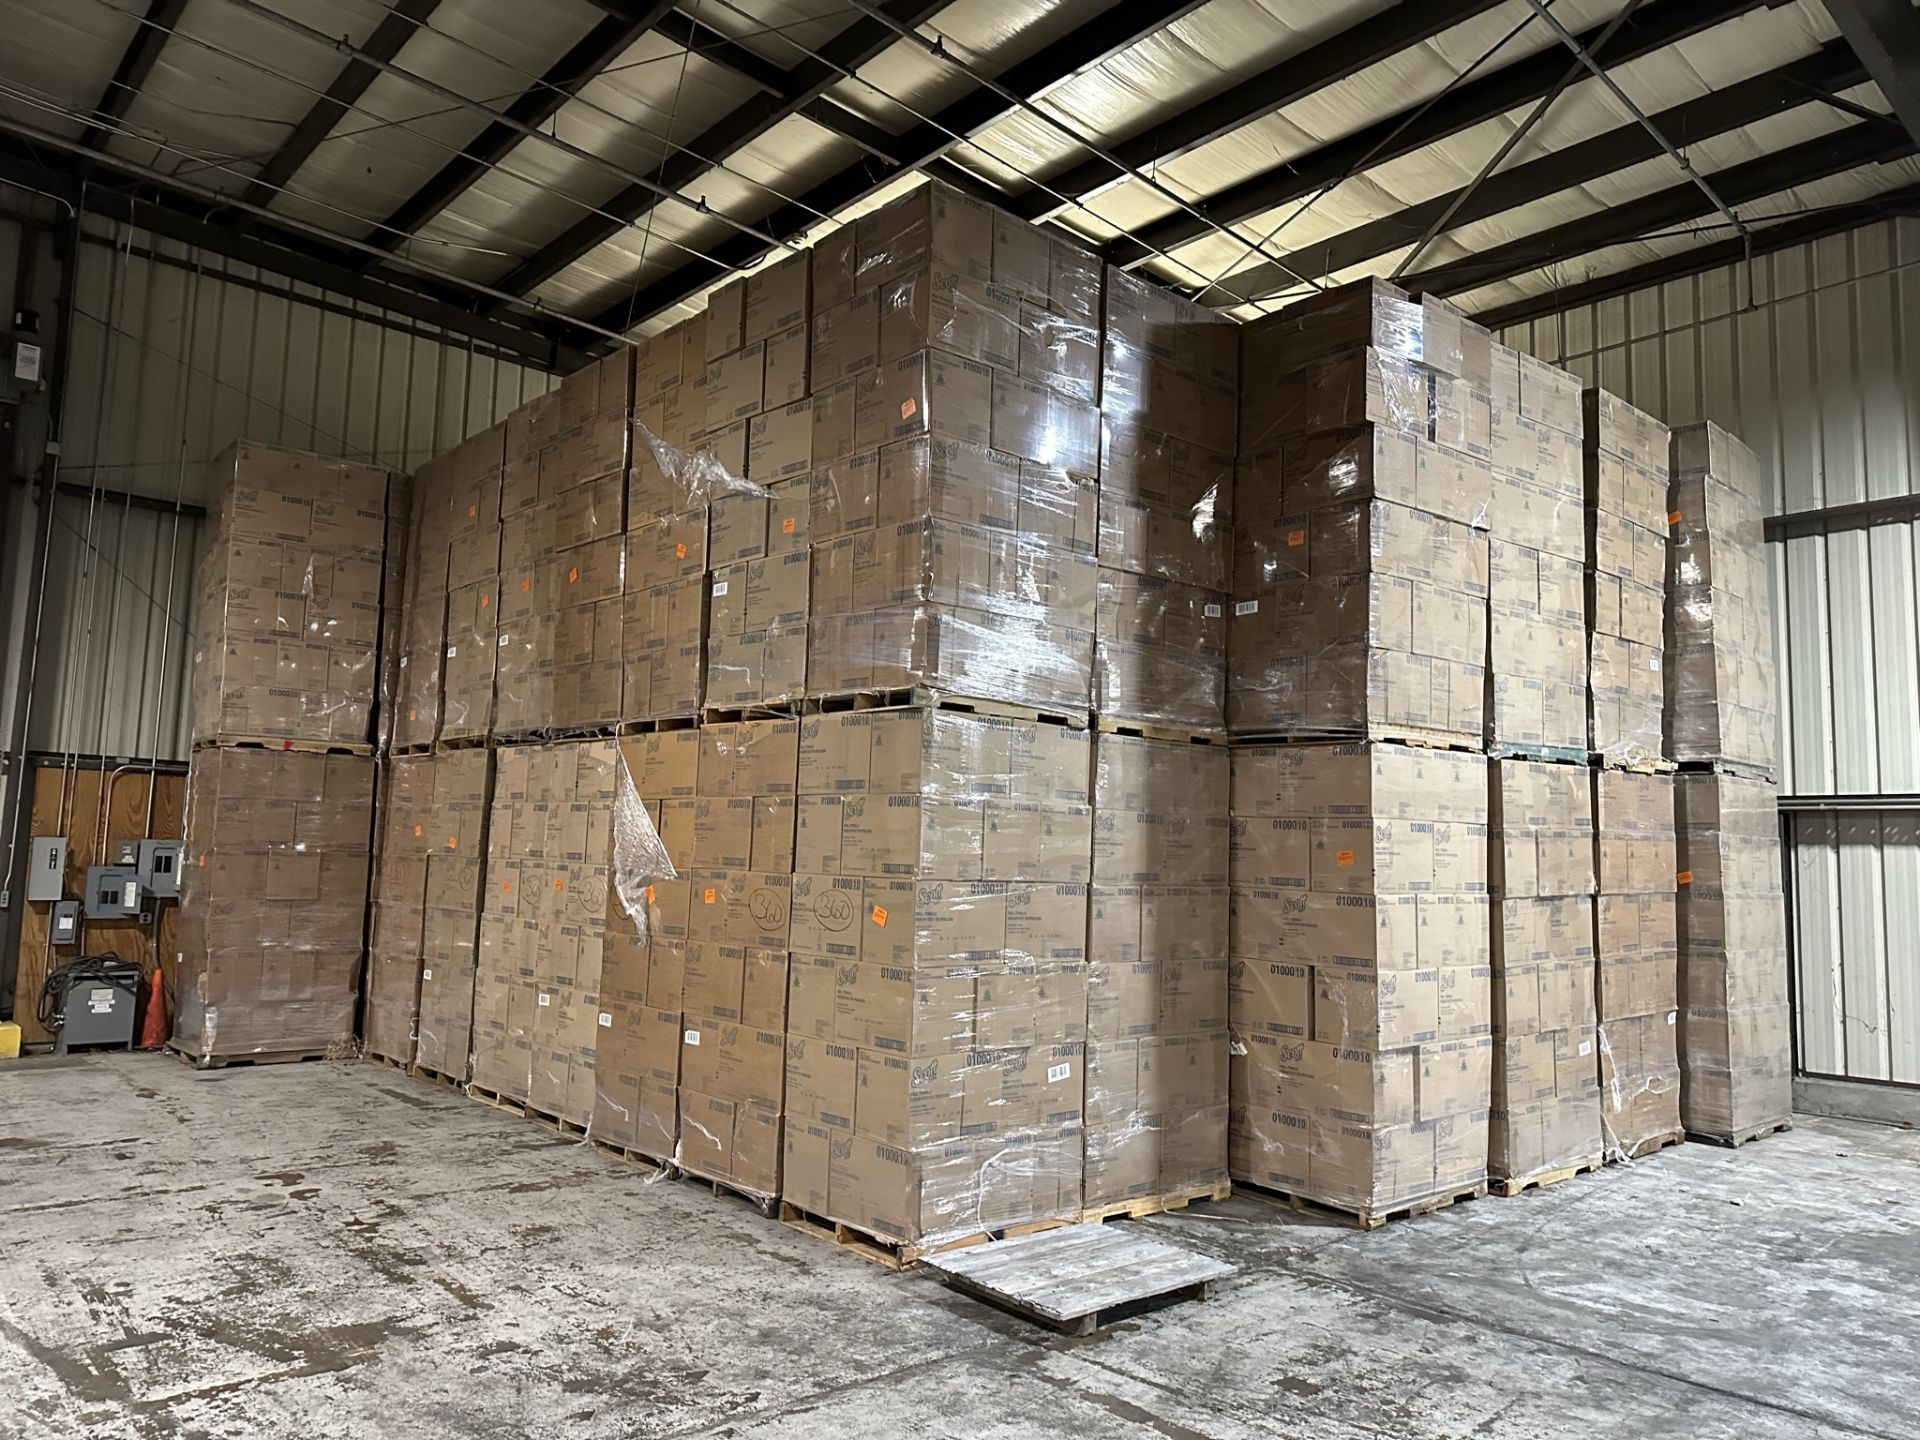 Lot of (780) Cases of Scott Essential High Capacity Hard Roll Towels - Image 2 of 3